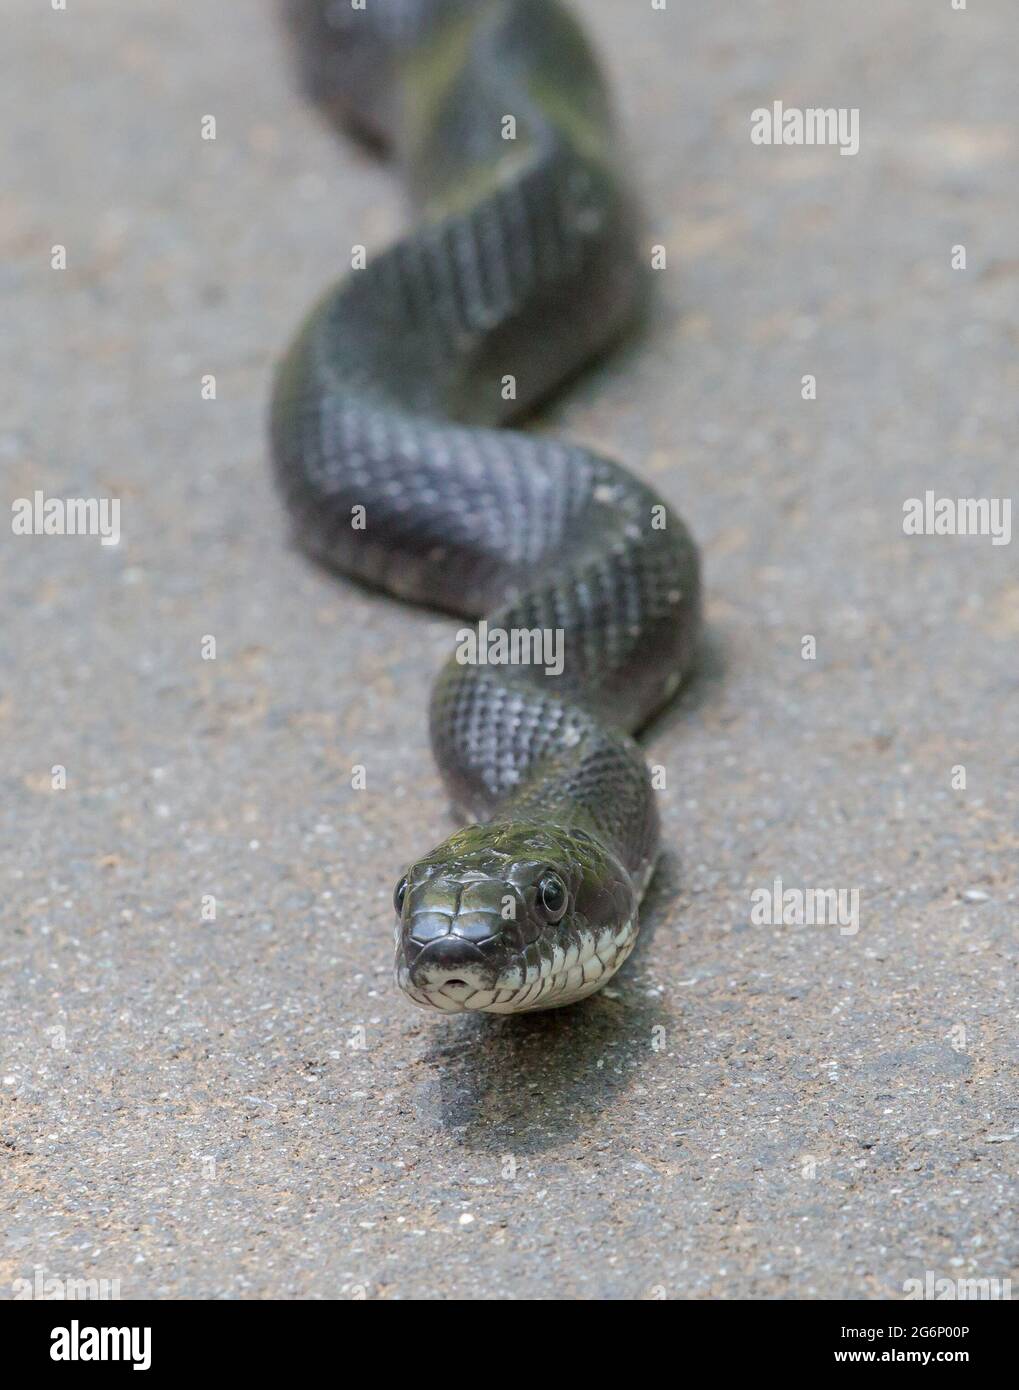 Closeup front view of an eastern (black) rat snake Stock Photo